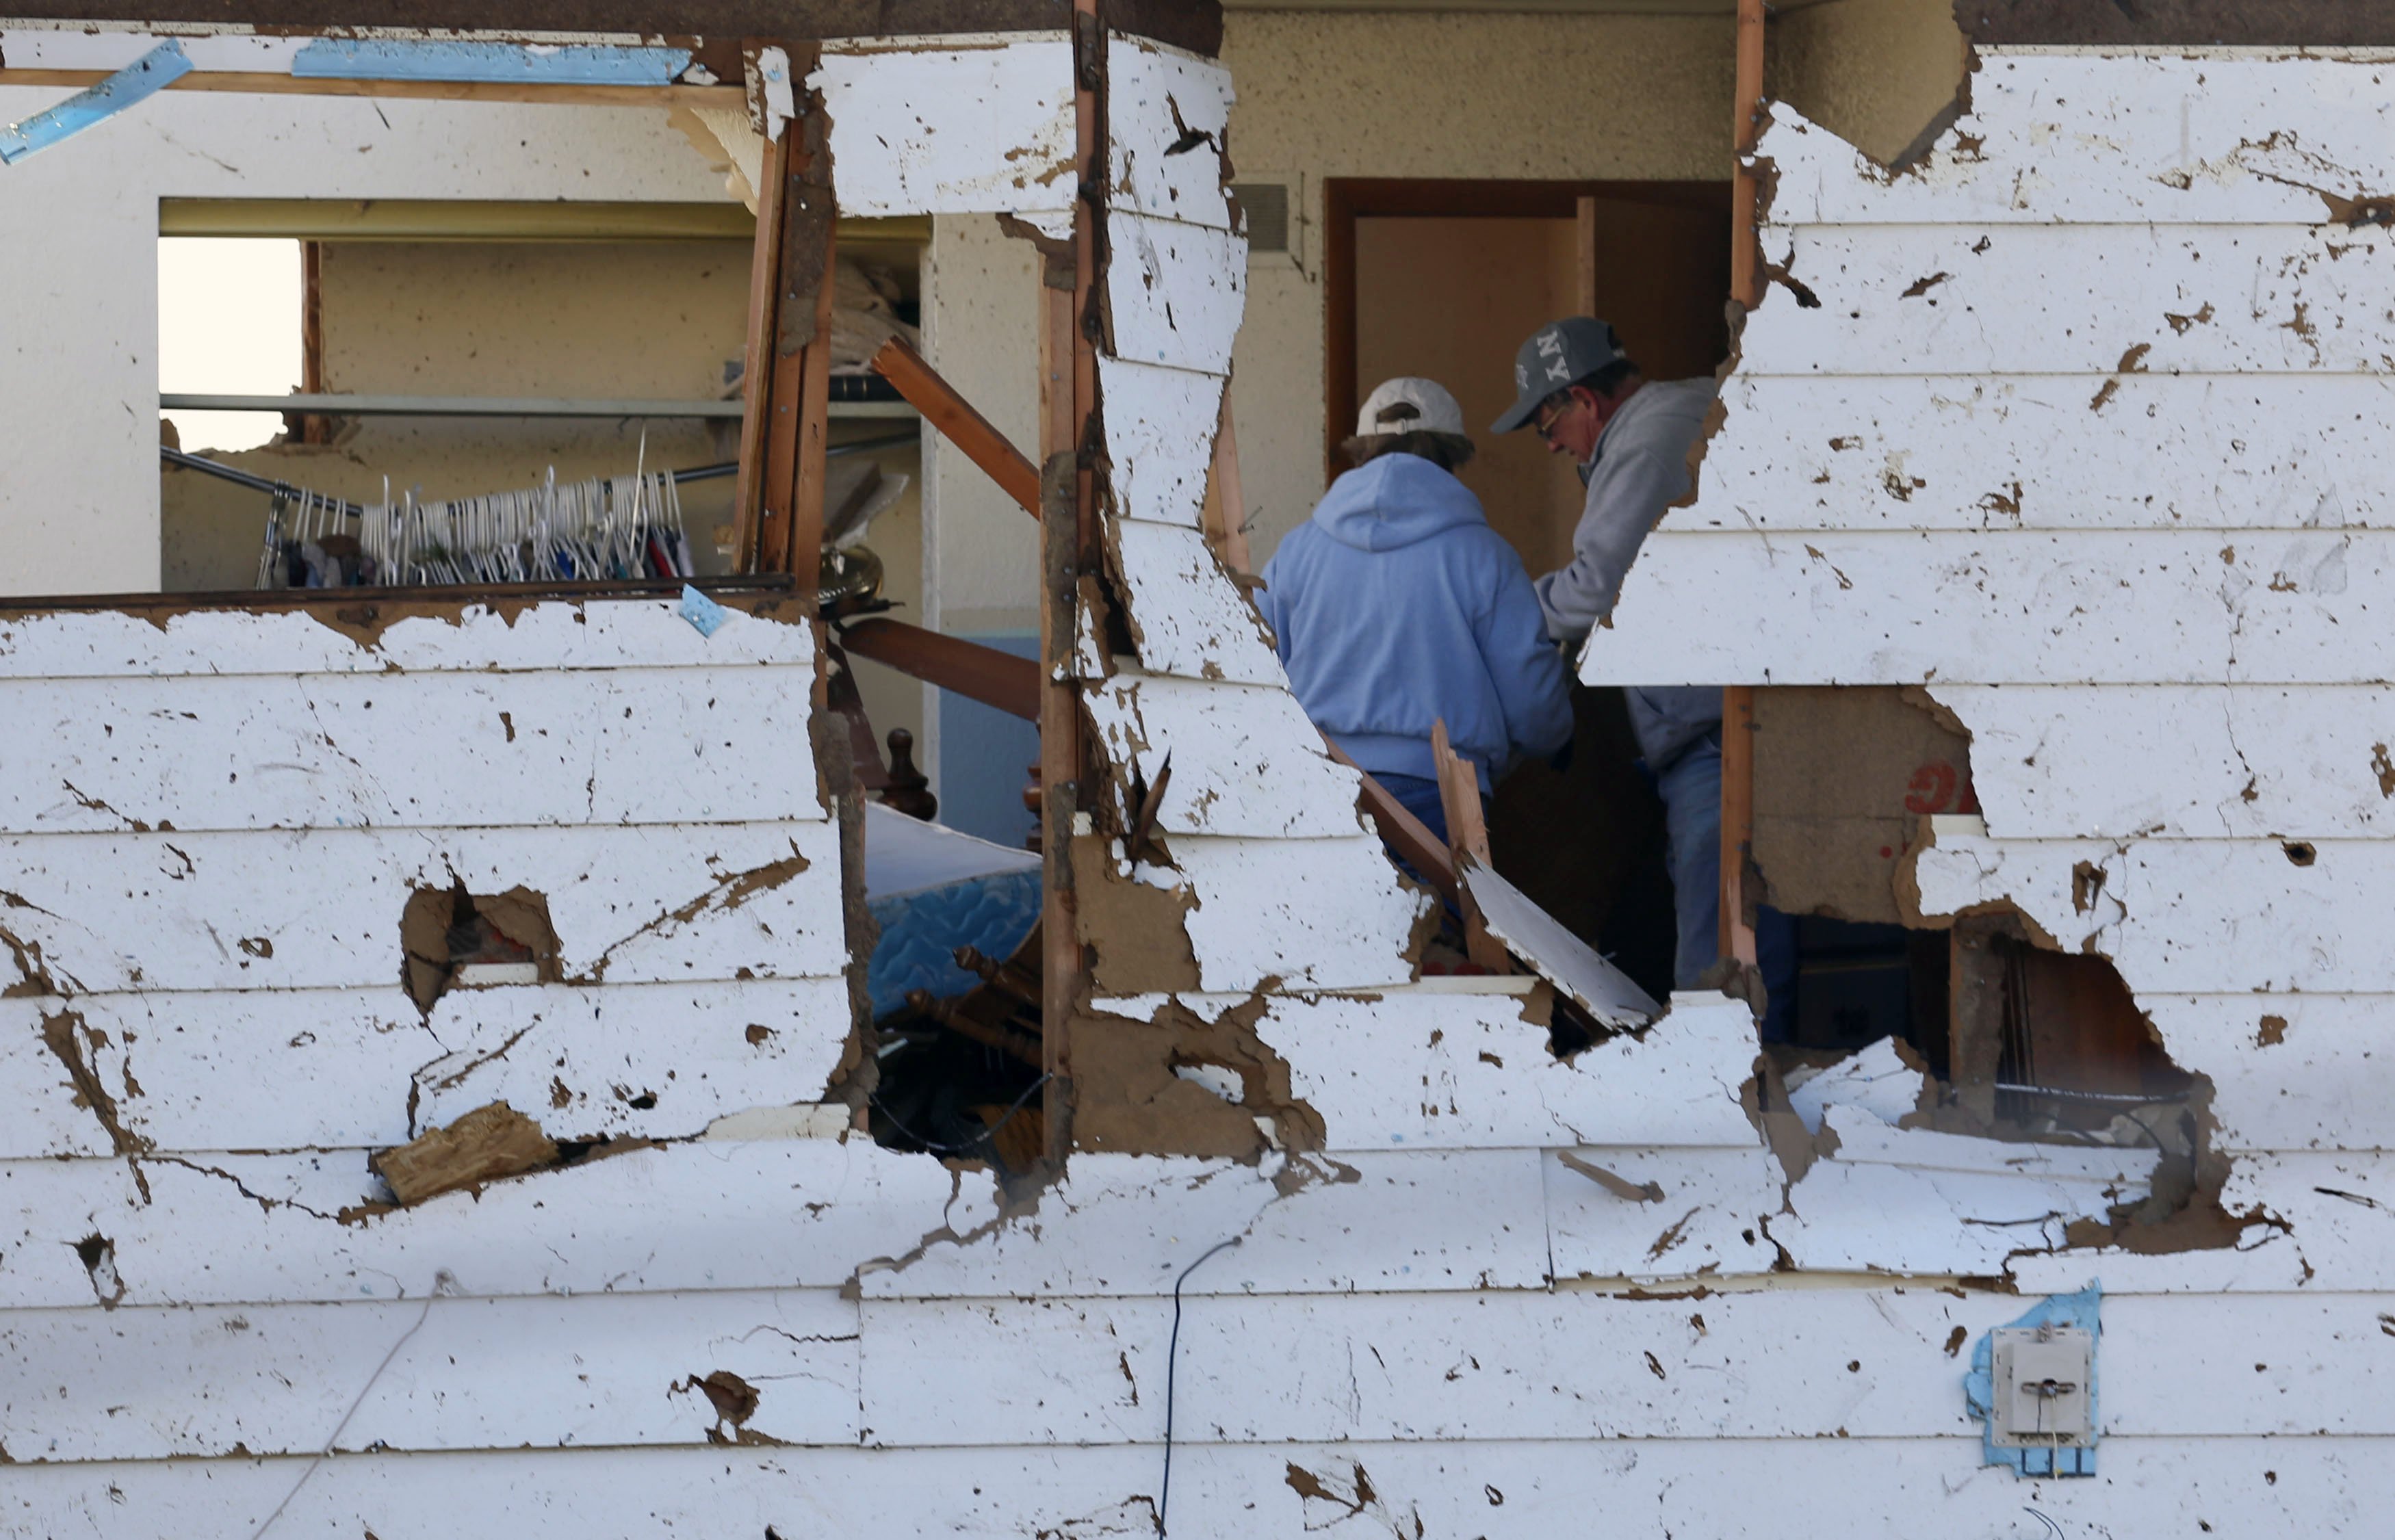 People are seen in a house going through belongings in the destruction caused by a tornado that touched down in Washington, Illinois